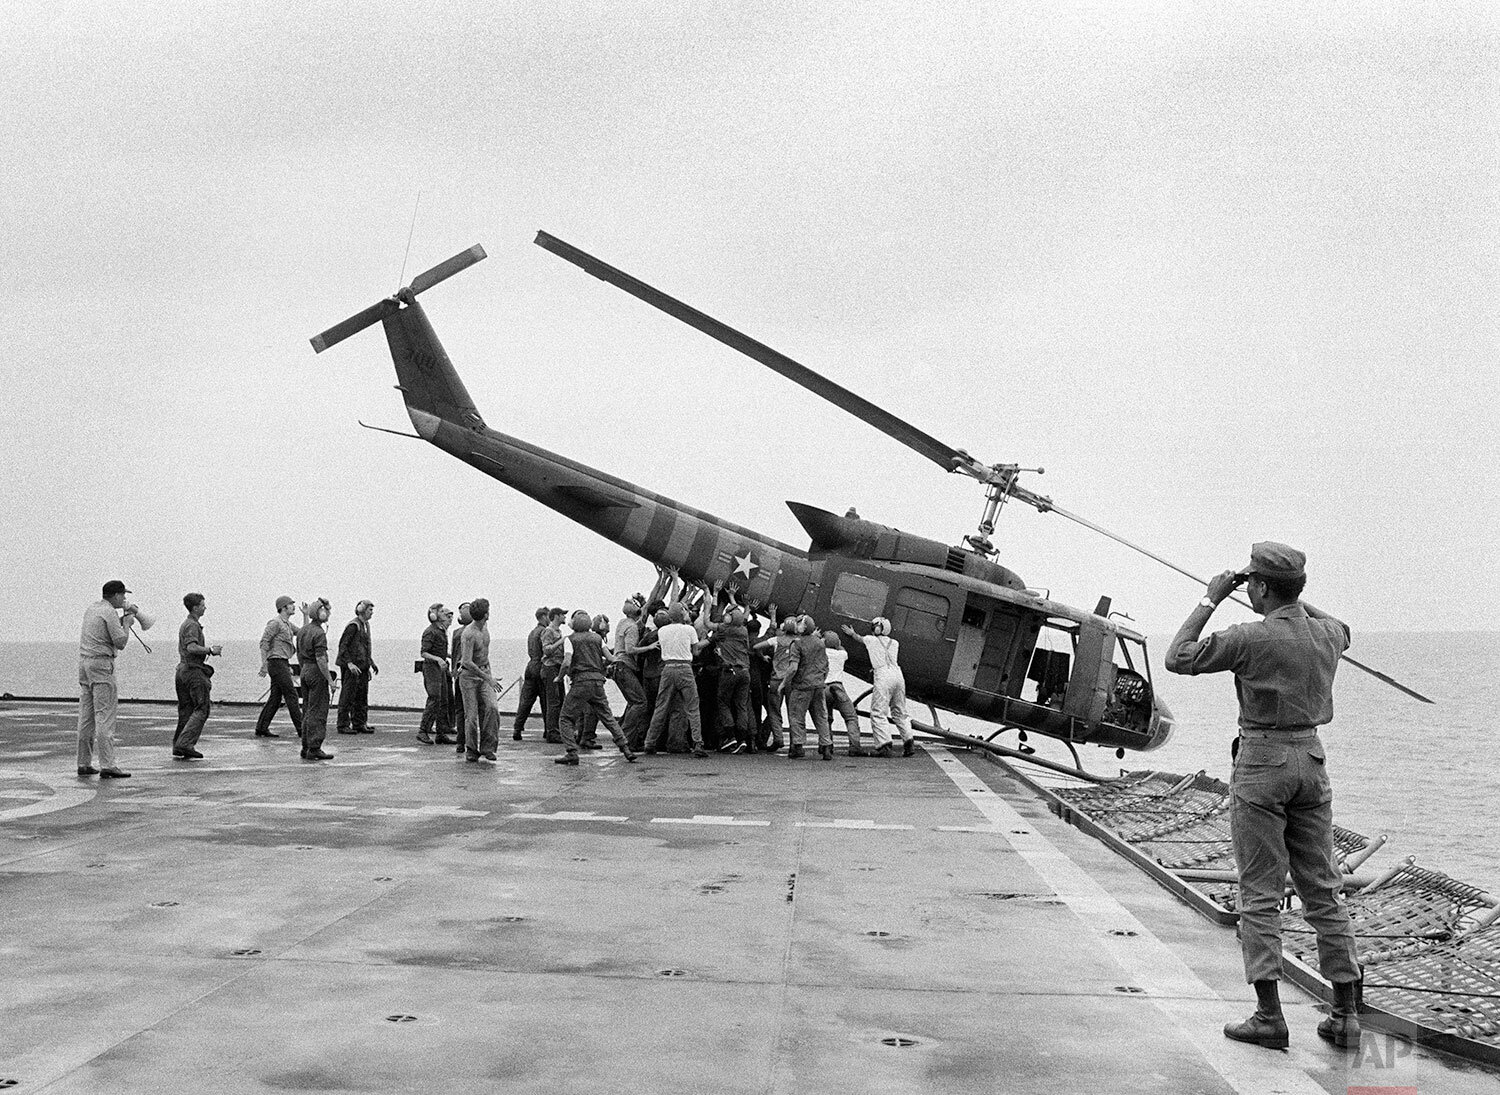  U.S. Navy personnel aboard the USS Blue Ridge push a helicopter into the sea off the coast of Vietnam in order to make room for more evacuation flights from Saigon, Tuesday, April 29, 1975.  The helicopter had carried Vietnamese fleeing Saigon as No